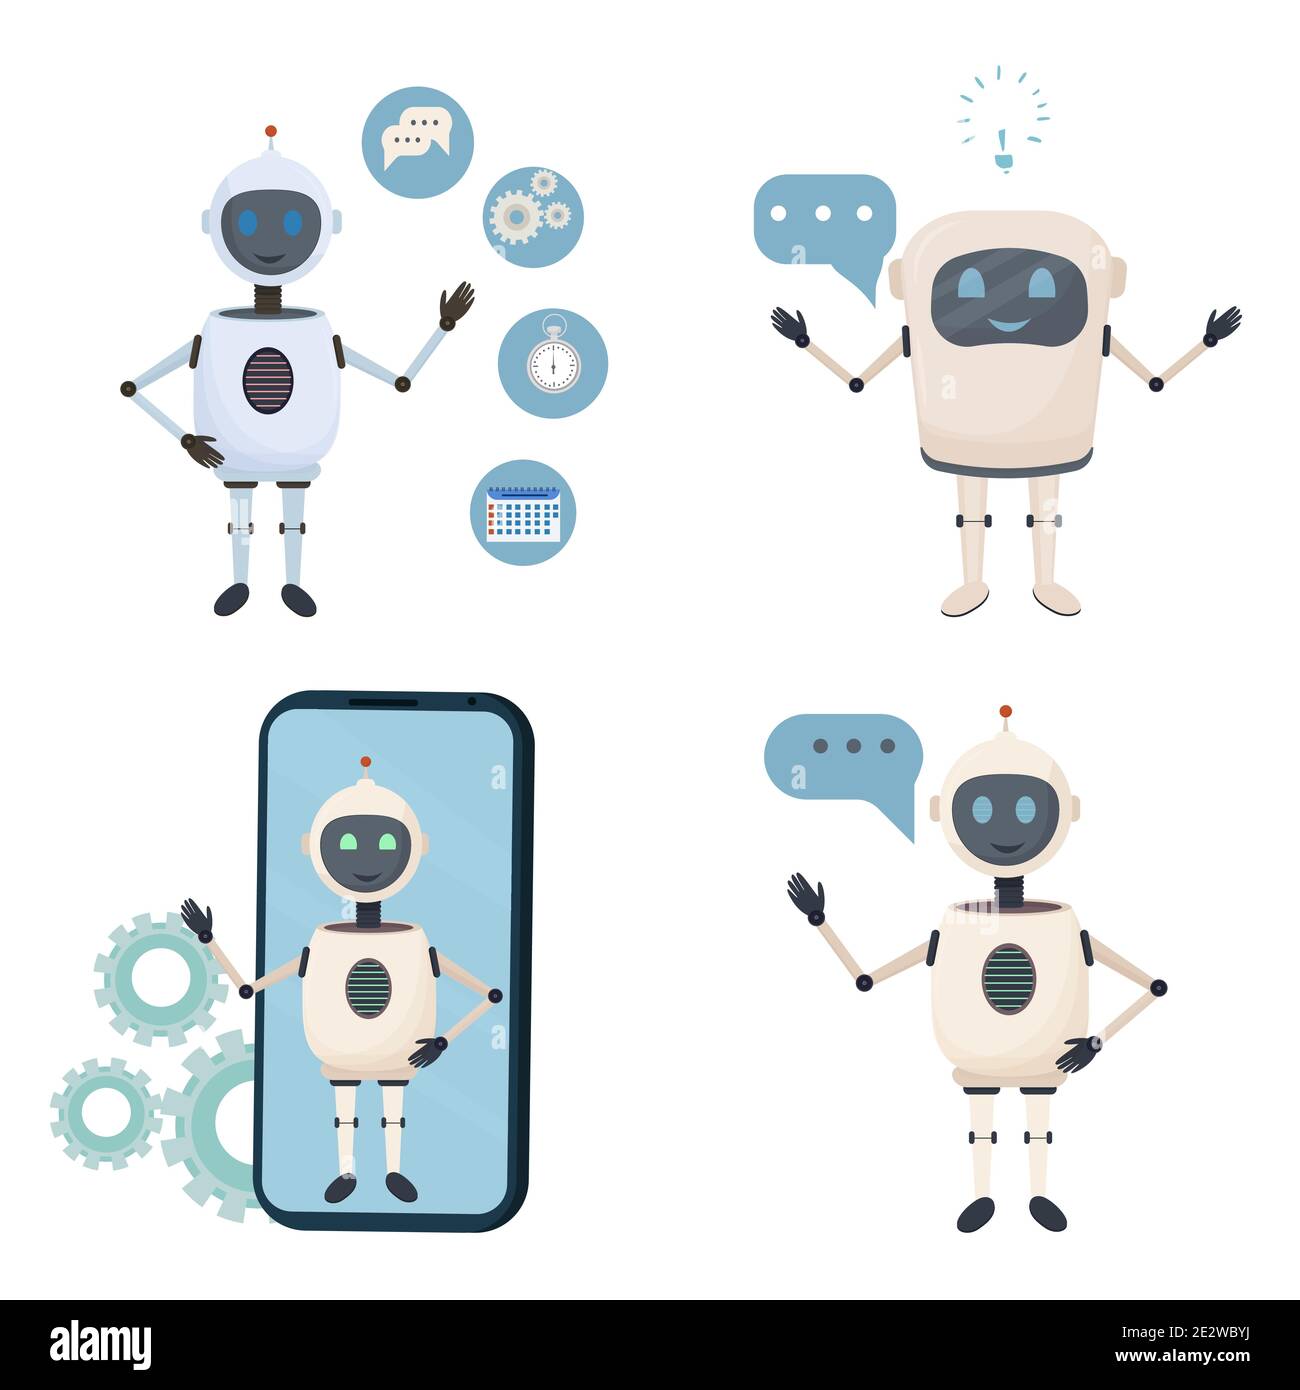 Chat bot icon with artificial intelligence. Illustration of a cute